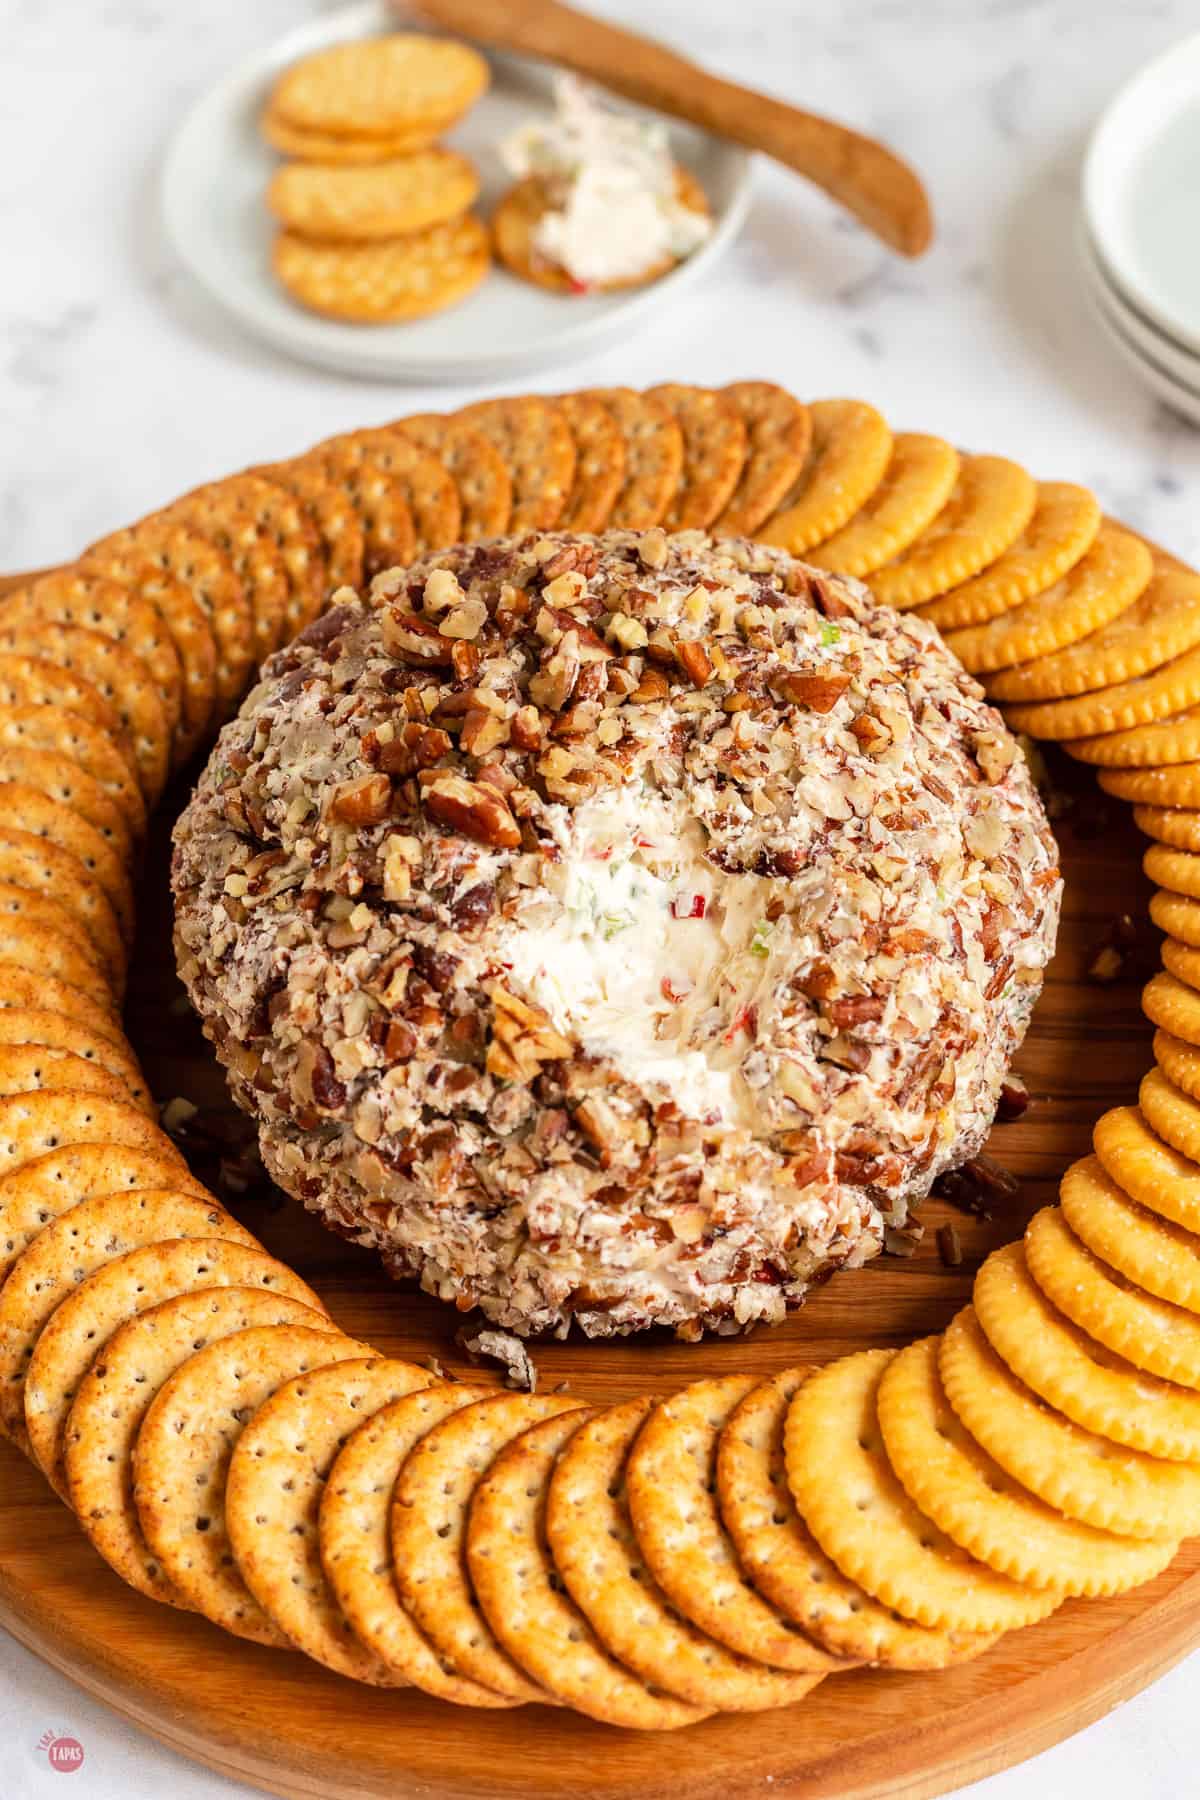 cheese ball with crackers